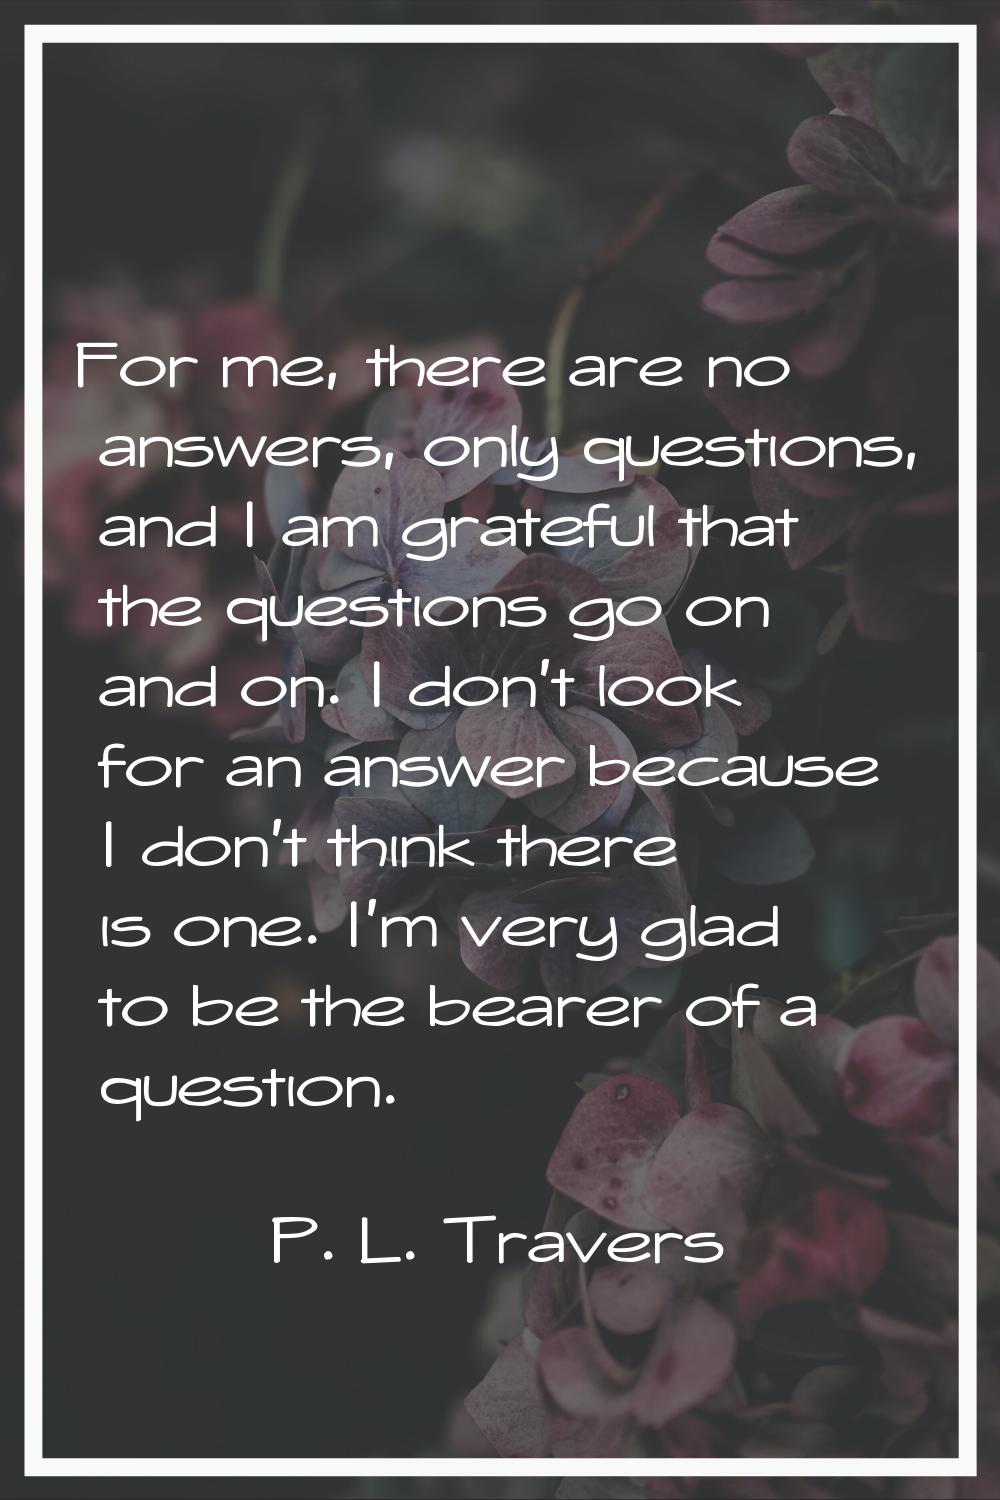 For me, there are no answers, only questions, and I am grateful that the questions go on and on. I 